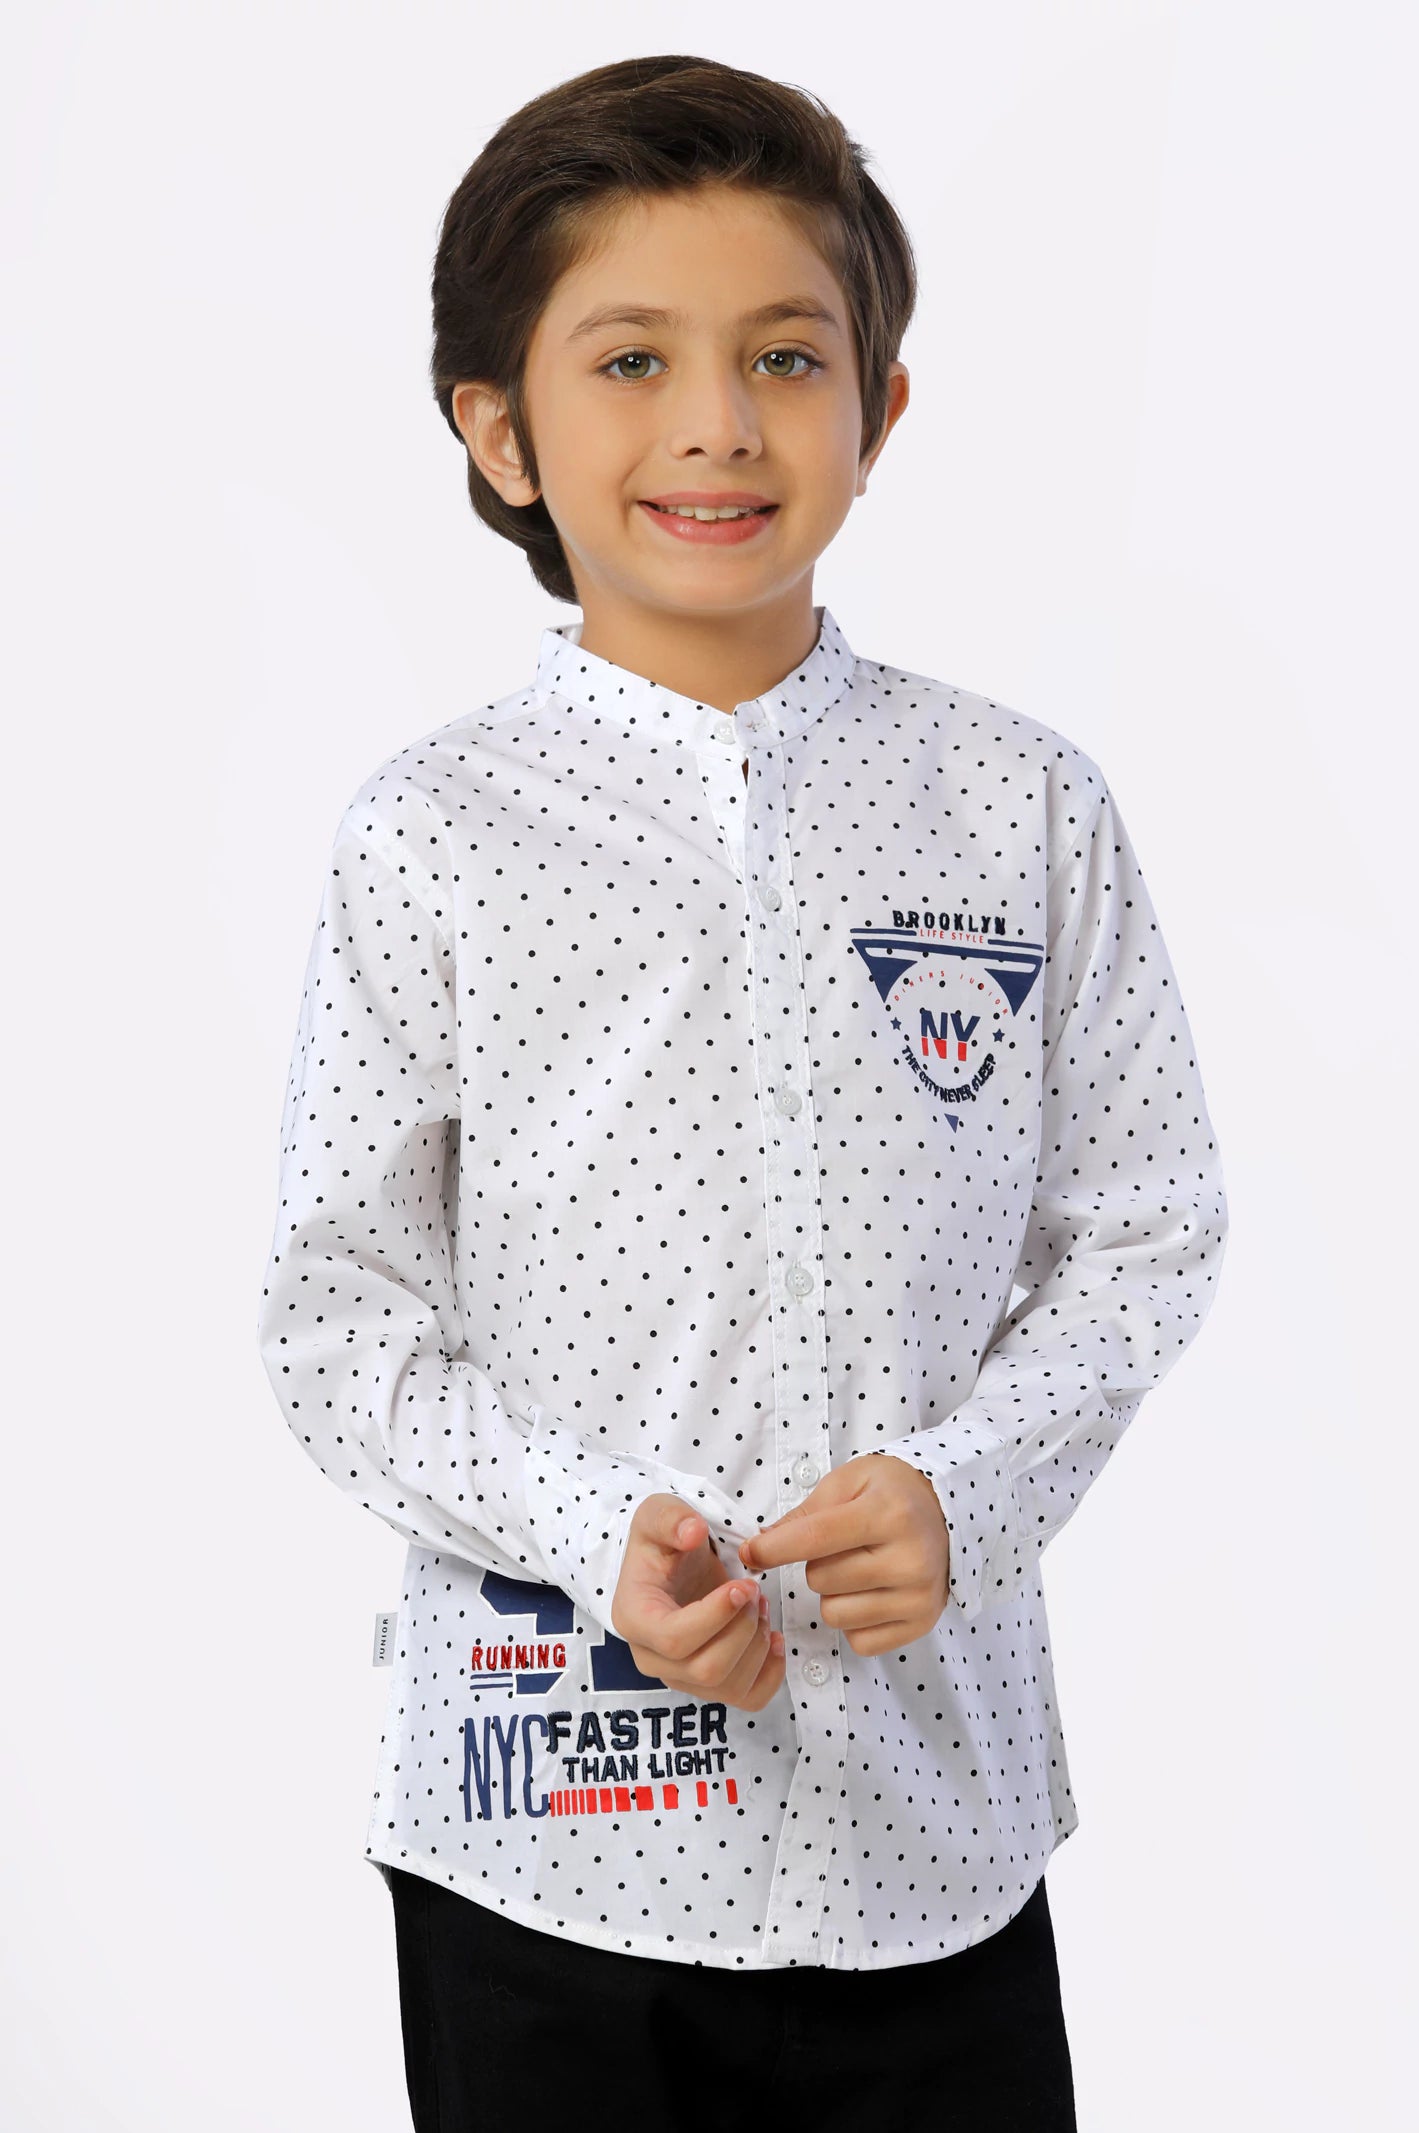 White Polka Dots Printed Boys Shirt From Diners